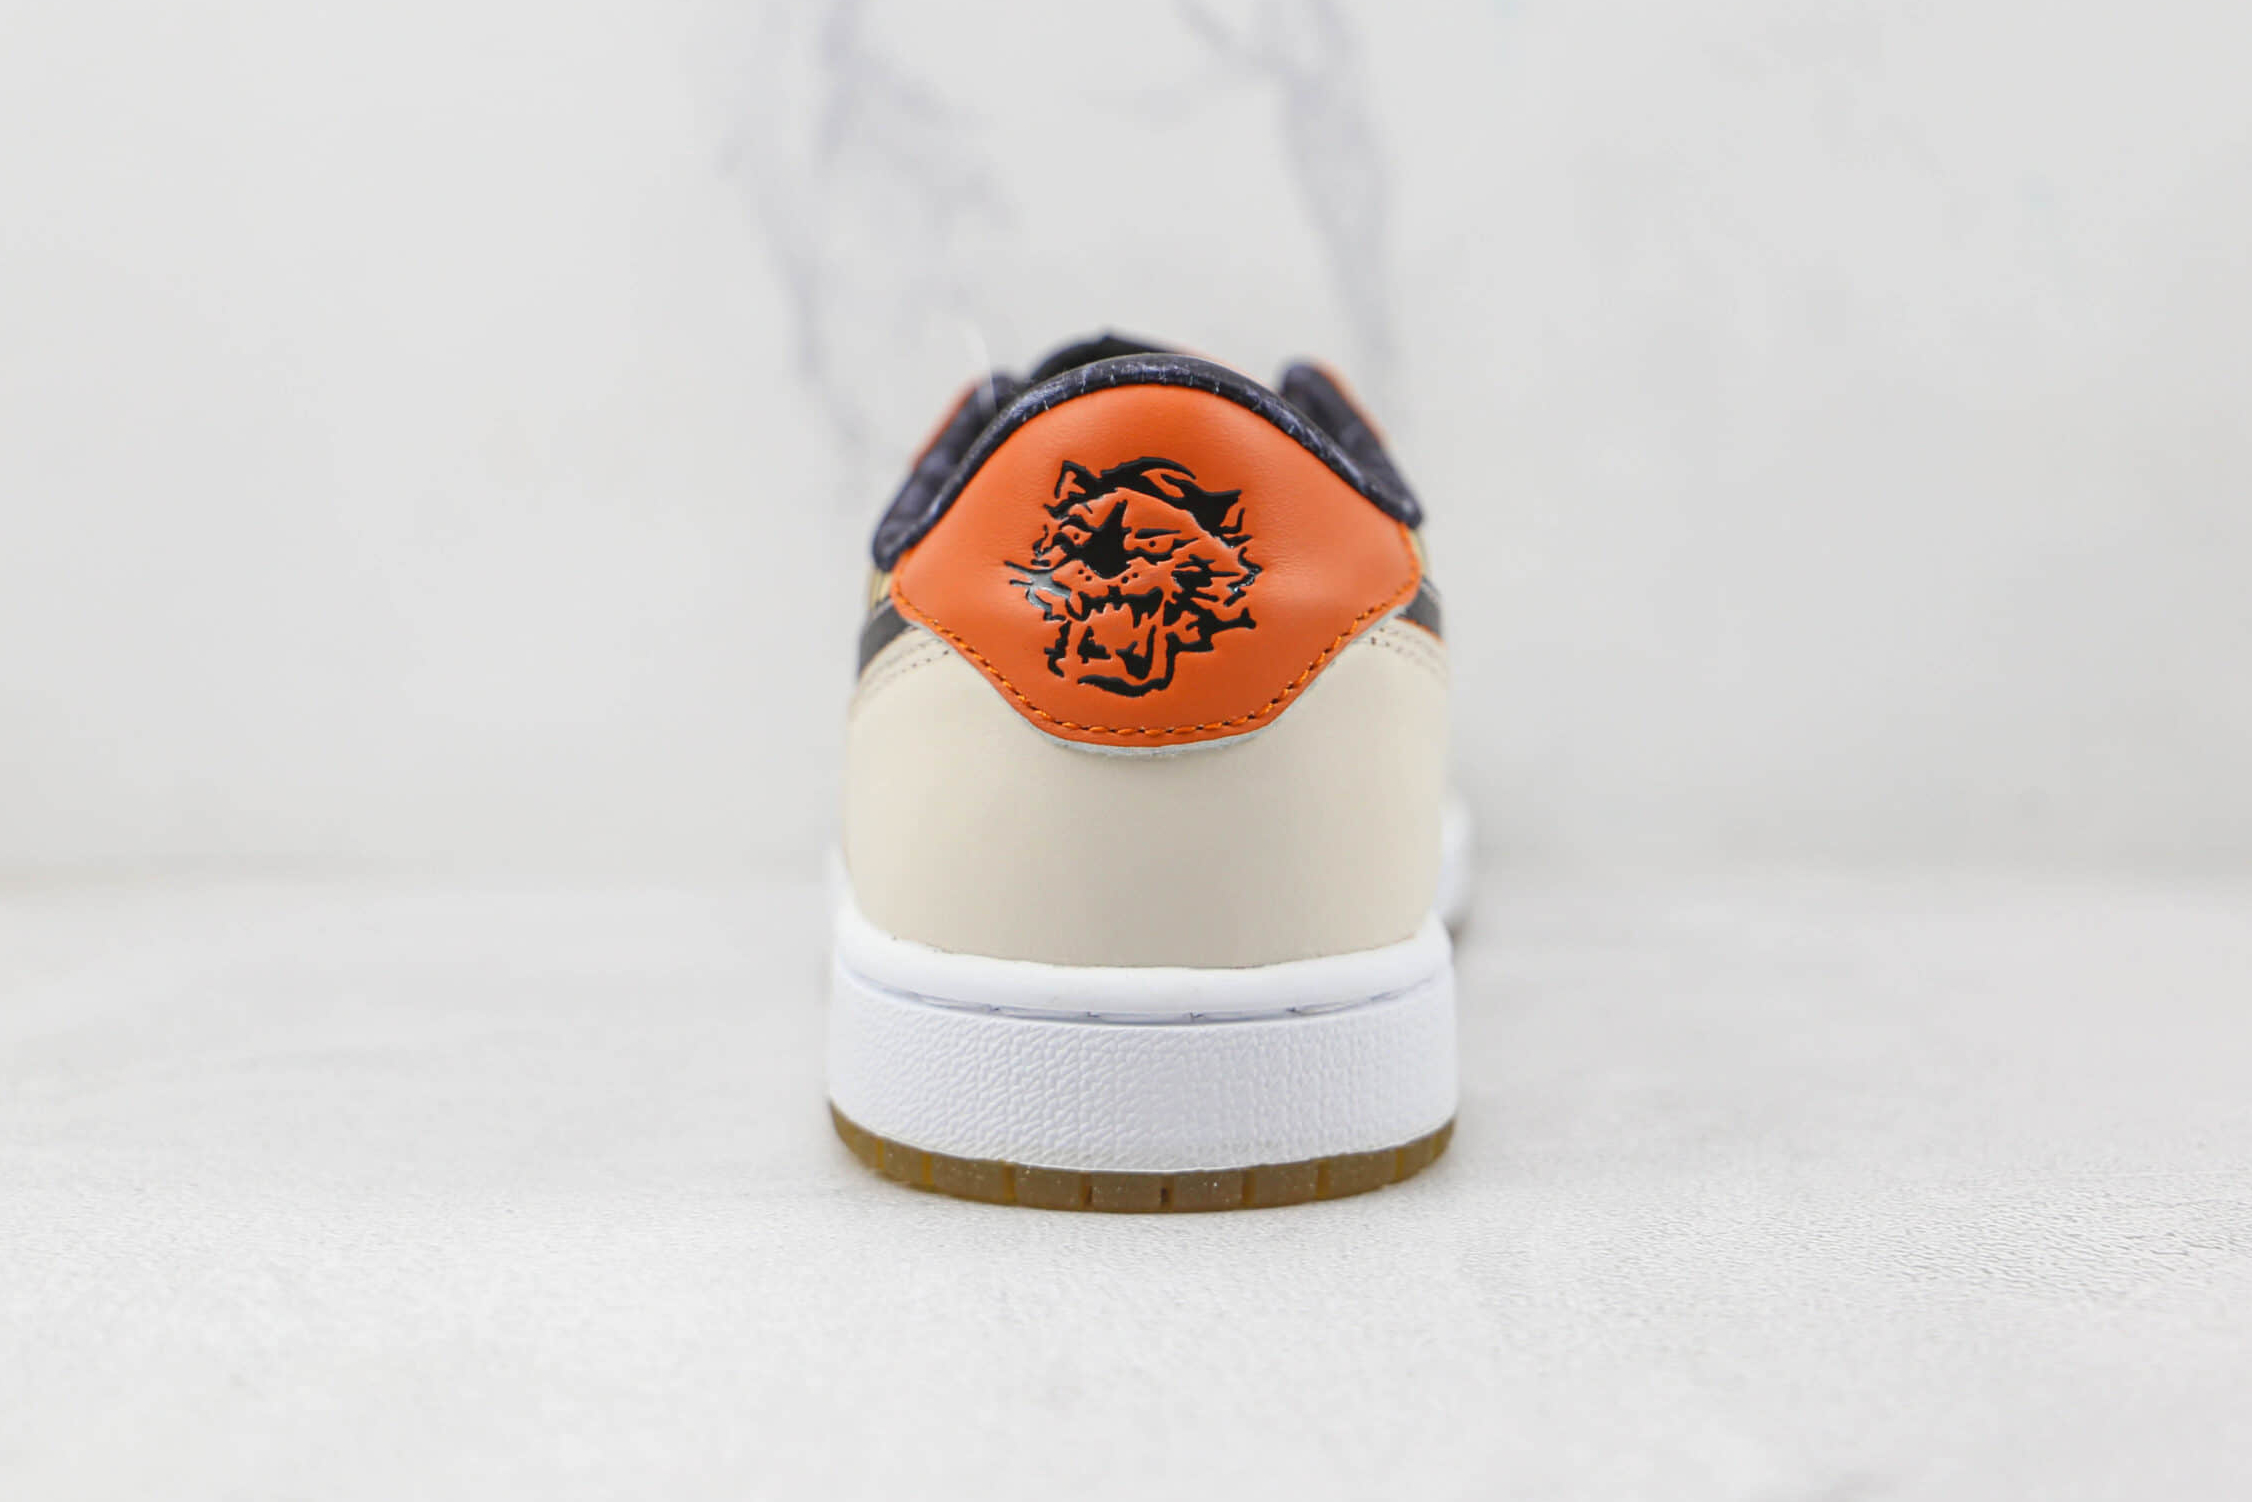 Air Jordan 1 Low OG 'Chinese New Years - Year Of The Tiger' DH6932-100 | Exclusive Limited Edition Sneaker